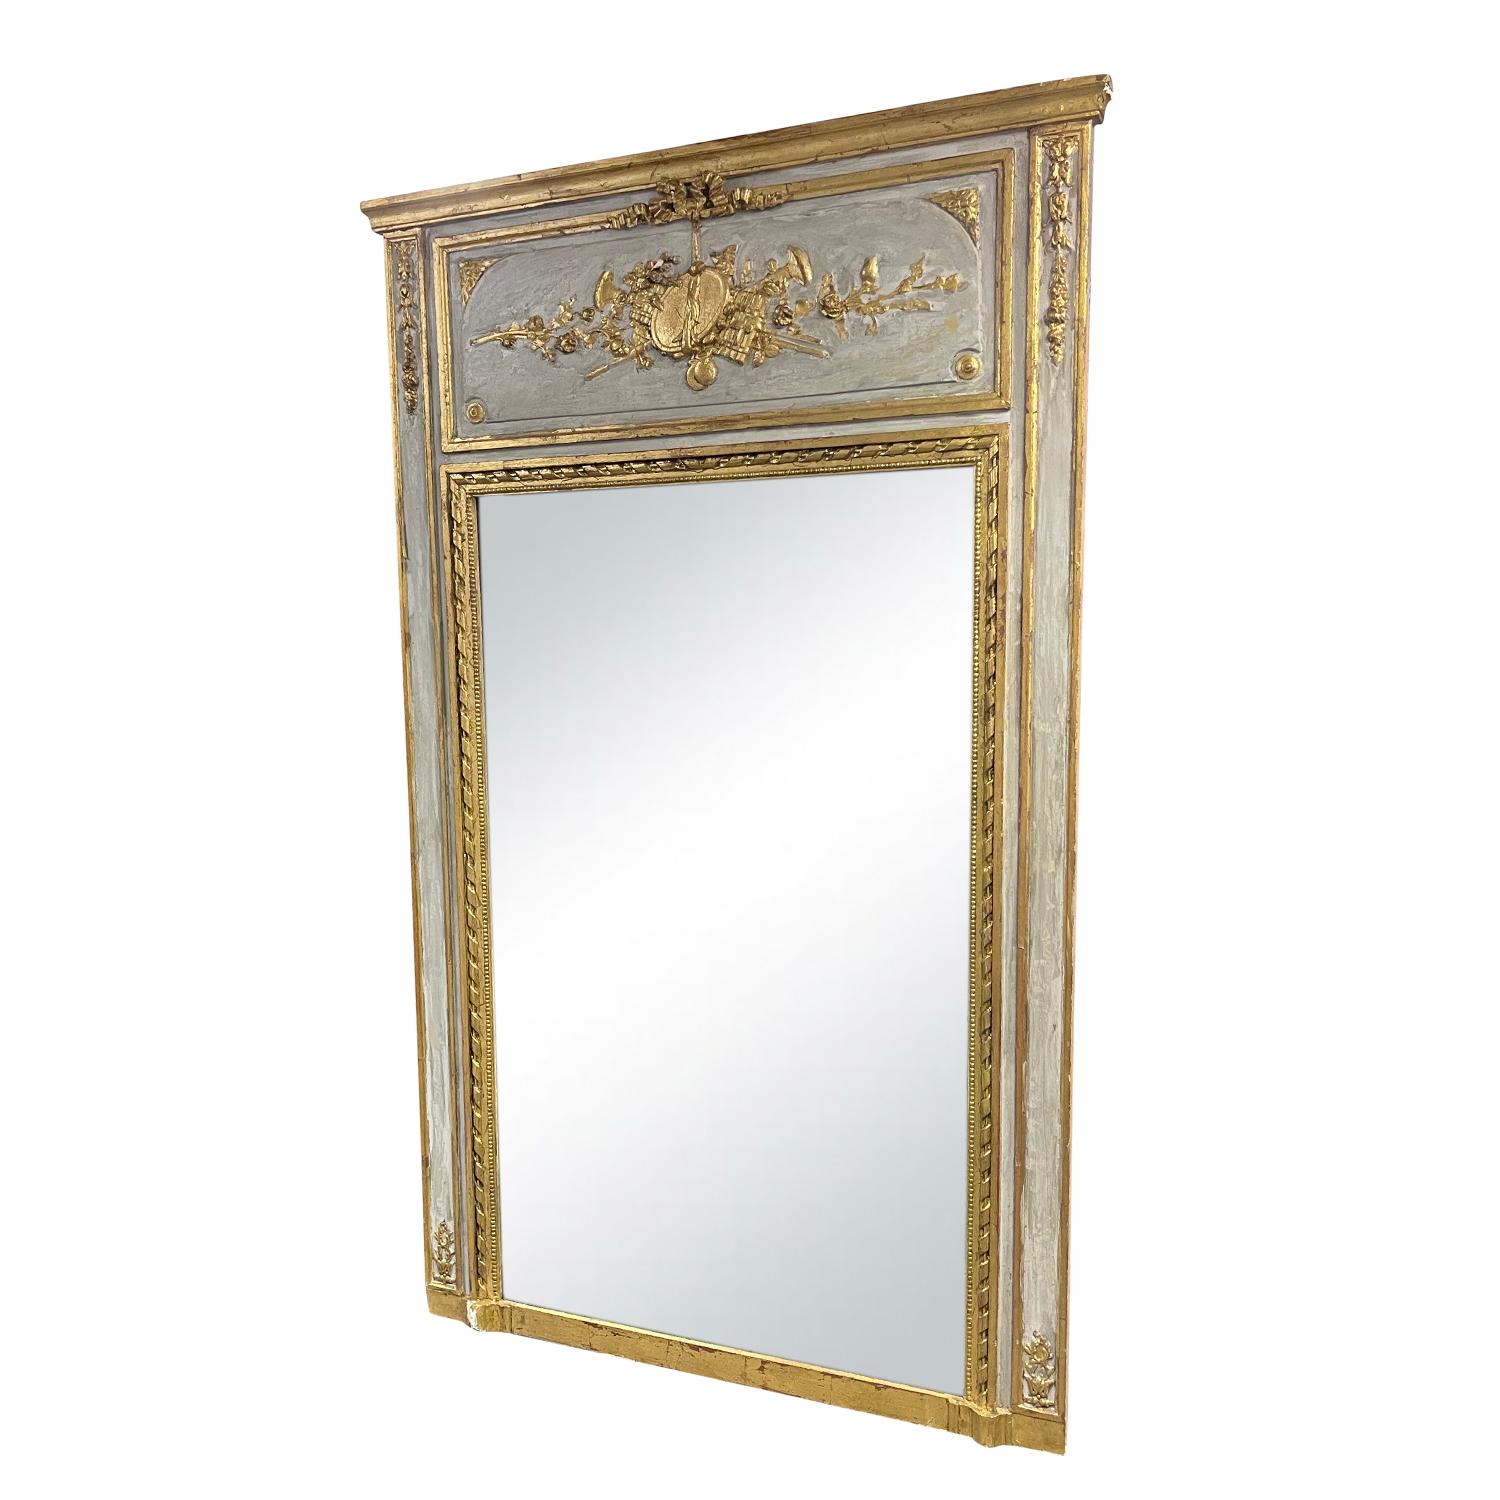 Empire 19th Century French Louis XVI Antique Gilded Wood Trumeau, Floor Glass Mirror For Sale